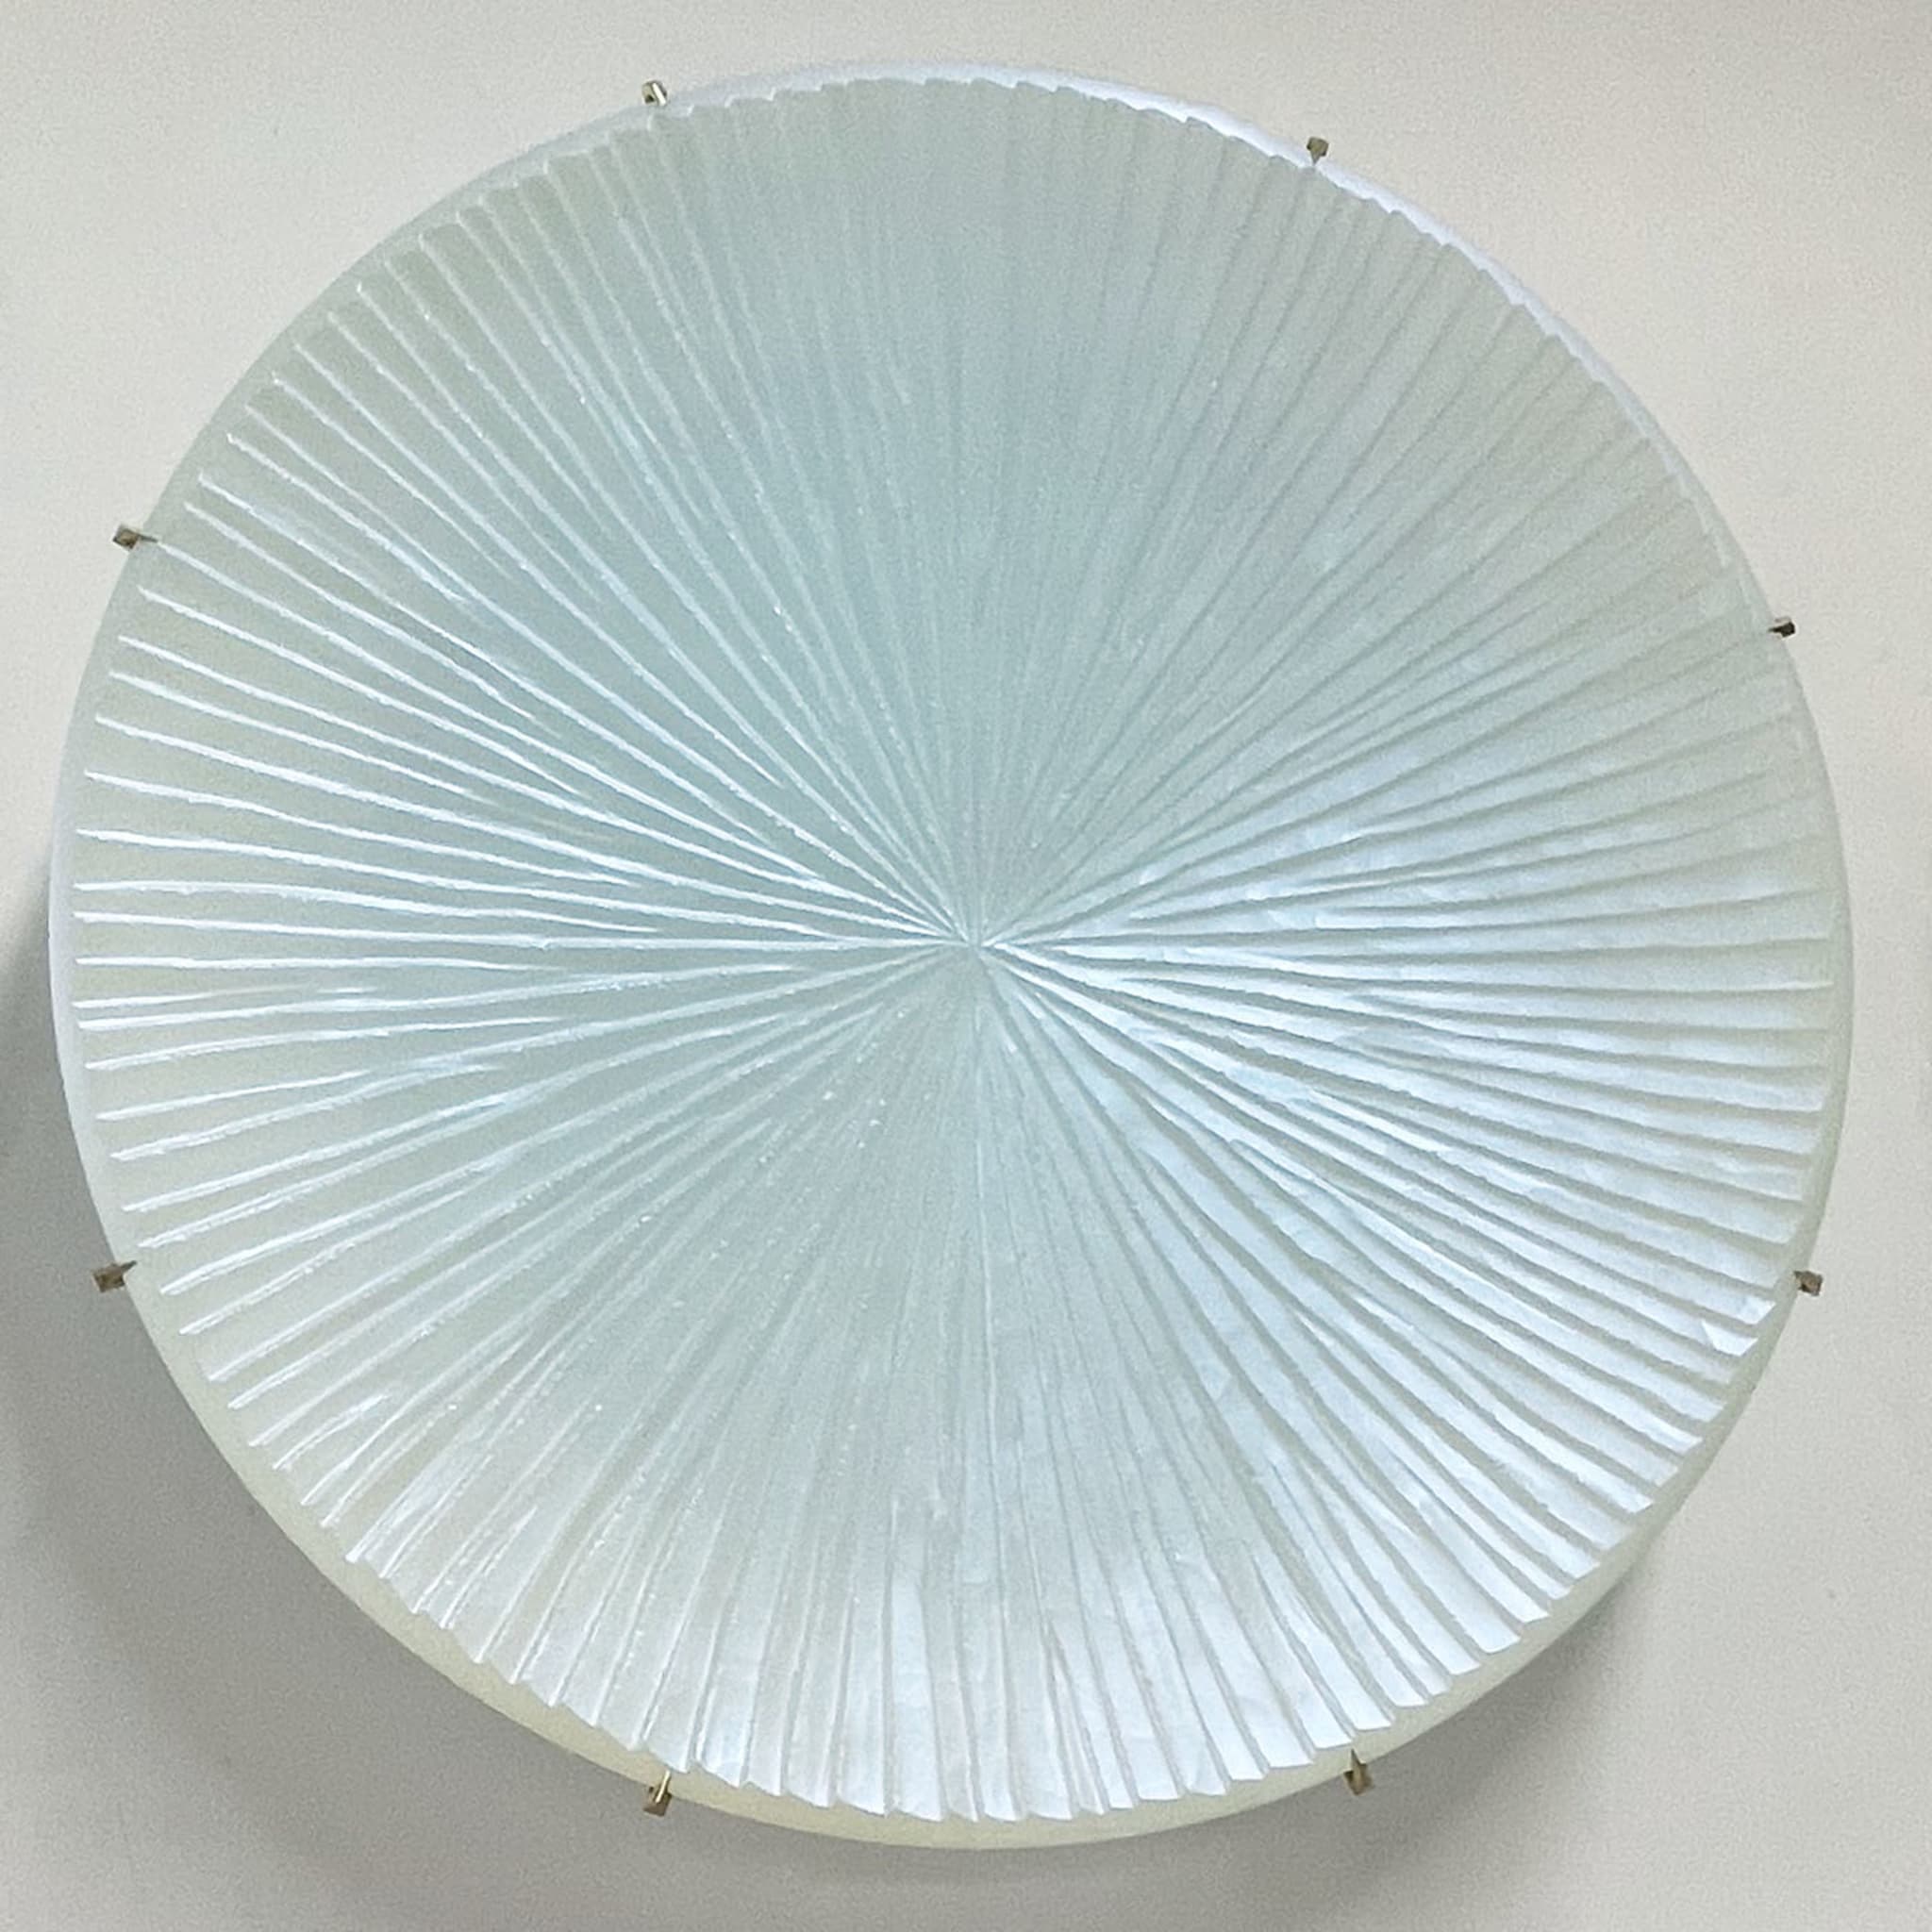 Pearly White Concave Wall Plate - Alternative view 3